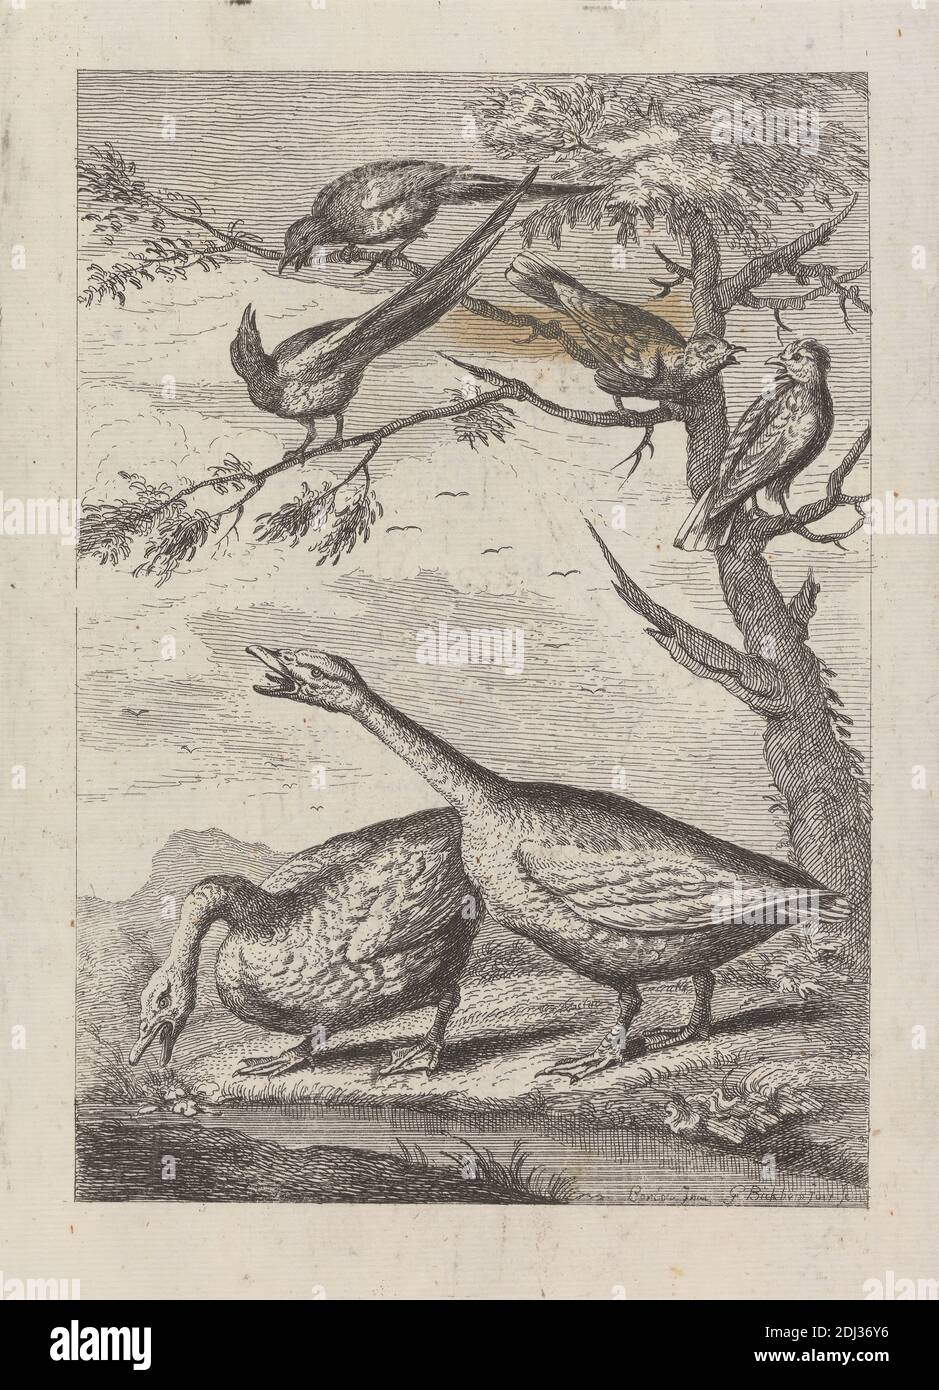 Two Geese and four other birds, a Pl. for 'A New Drawing Book...of Various Kinds of Birds the Life by Mr. Francis Barlow' 1731 (1 of 9), Print made by George Bickham, 1683/4–1758, British, after Francis Barlow, ca. 1626–1704, British, Published by Henry Overton, 1675/6–1751, British, 1731, Etching on medium, smooth, cream laid paper, Sheet: 11 5/16 x 7 5/16 inches (28.8 x 18.6 cm), Plate: 8 3/8 x 6 1/8 inches (21.3 x 15.5 cm), and Image: 7 5/16 x 5 1/8 inches (18.5 x 13 cm), animal art, birds, geese, magpie, mountains, river, singing, tree Stock Photo